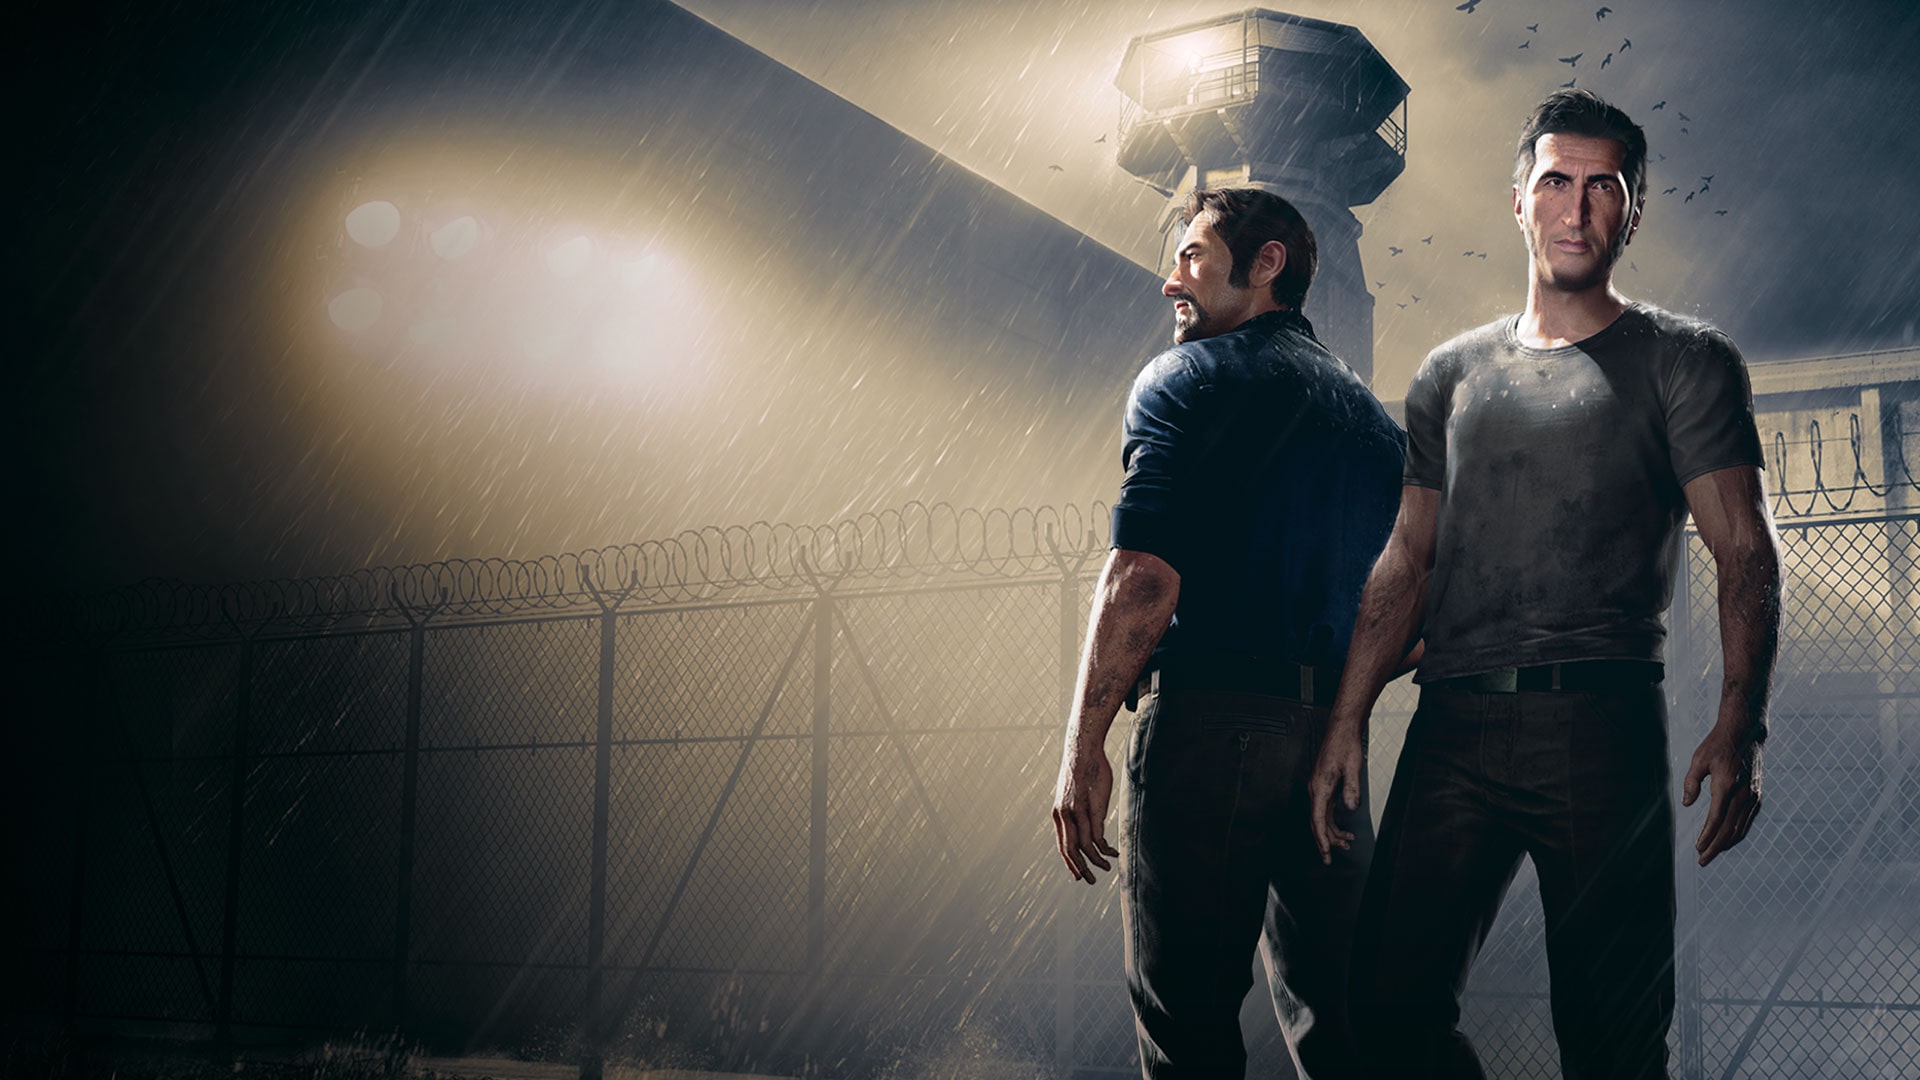 a way out ps4 store